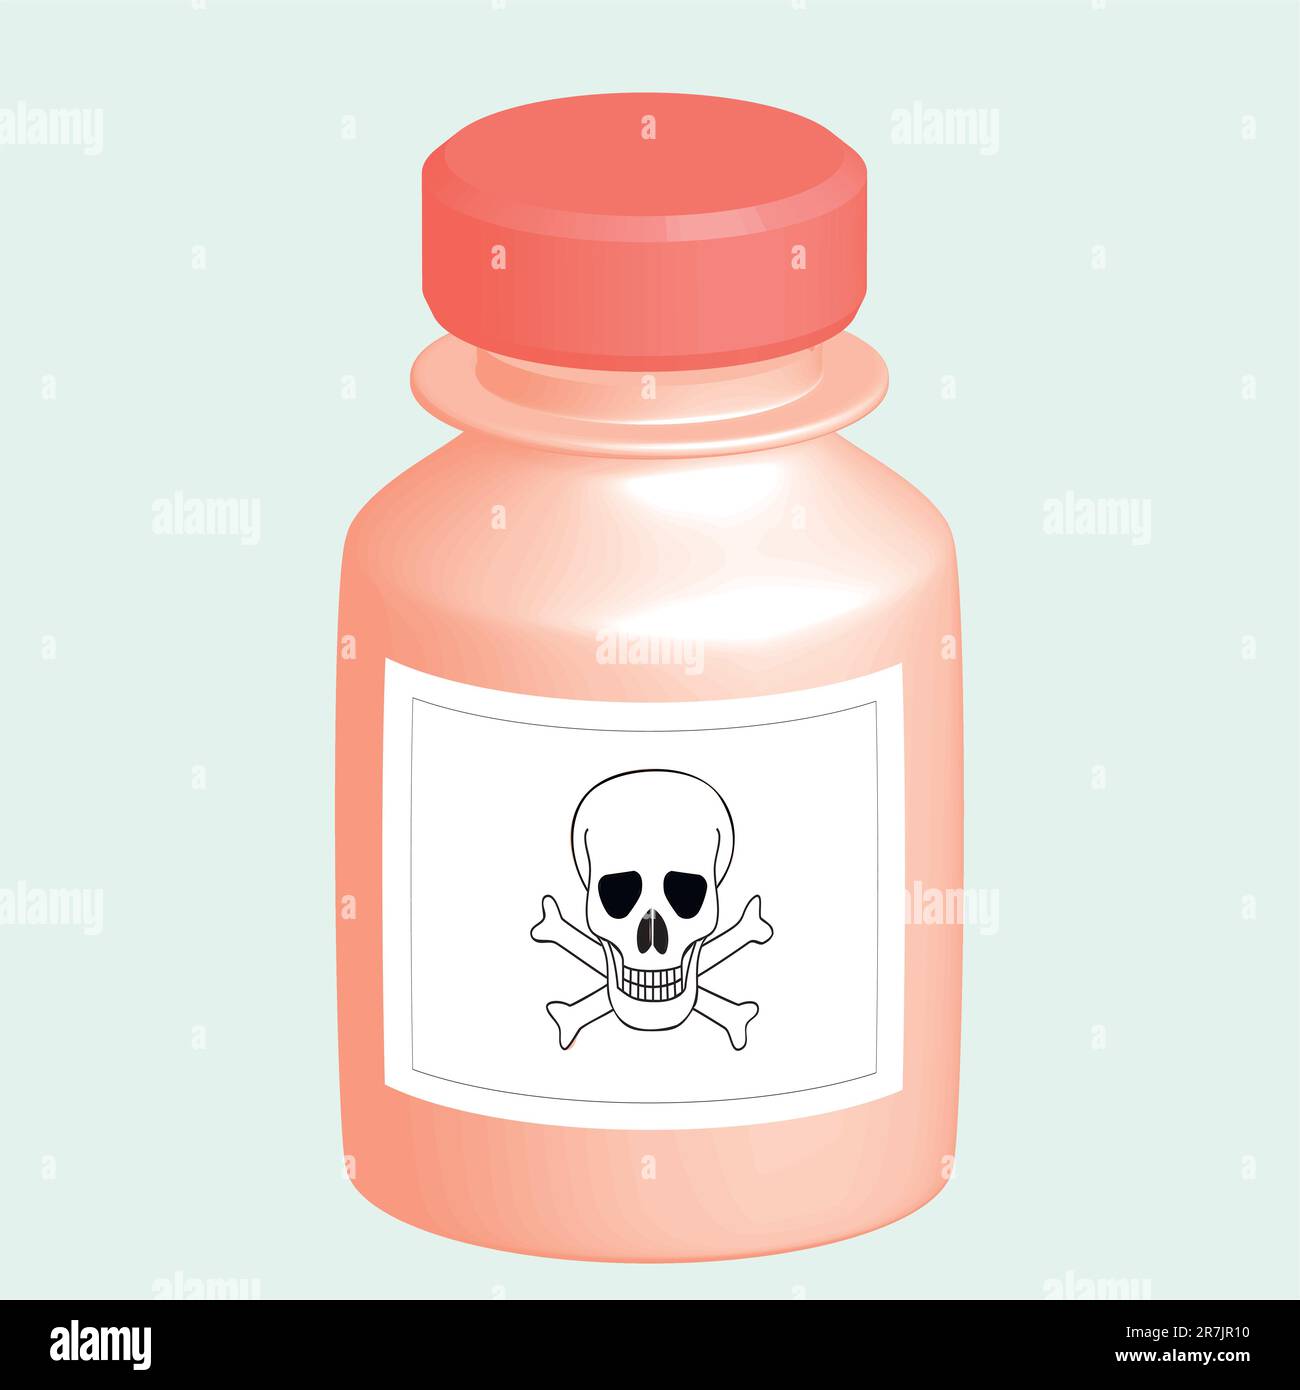 Vector image of a red bottle with a poisonous liquid Stock Vector